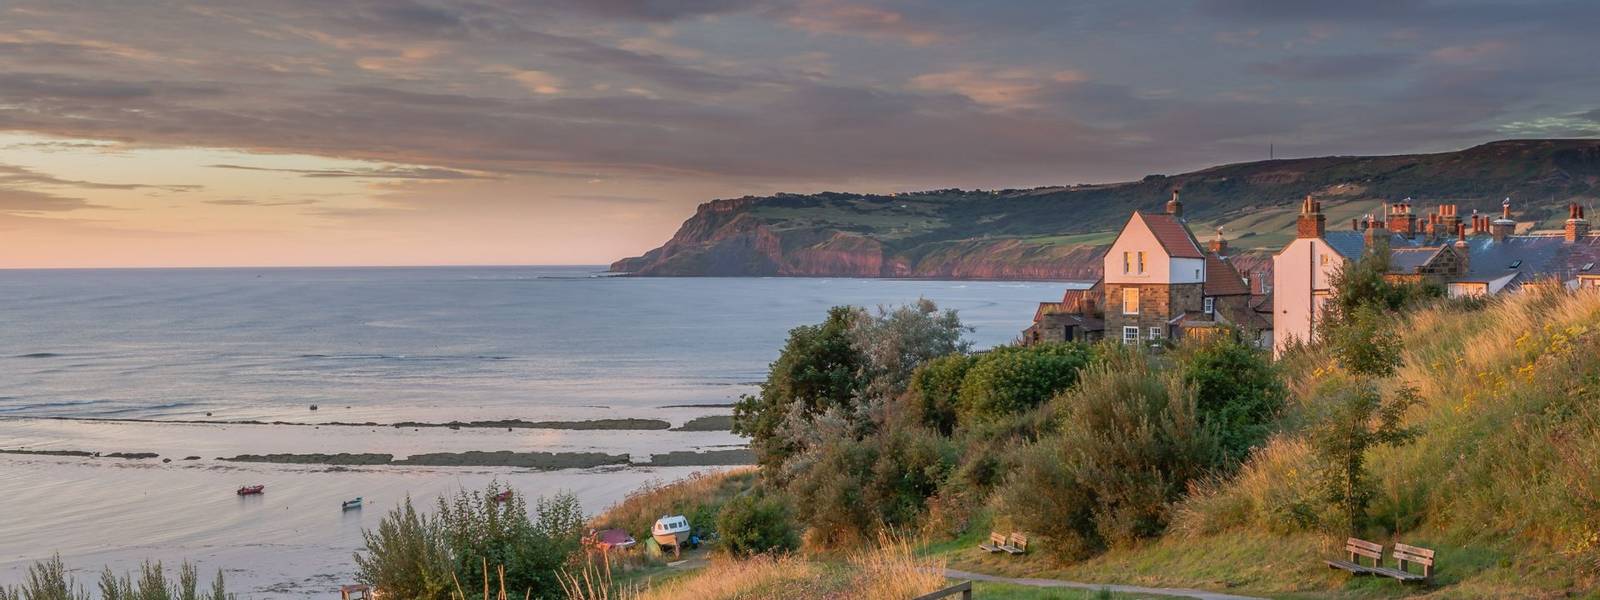 Whitby - Outdoor Escapes - AdobeStock_131977283.jpeg